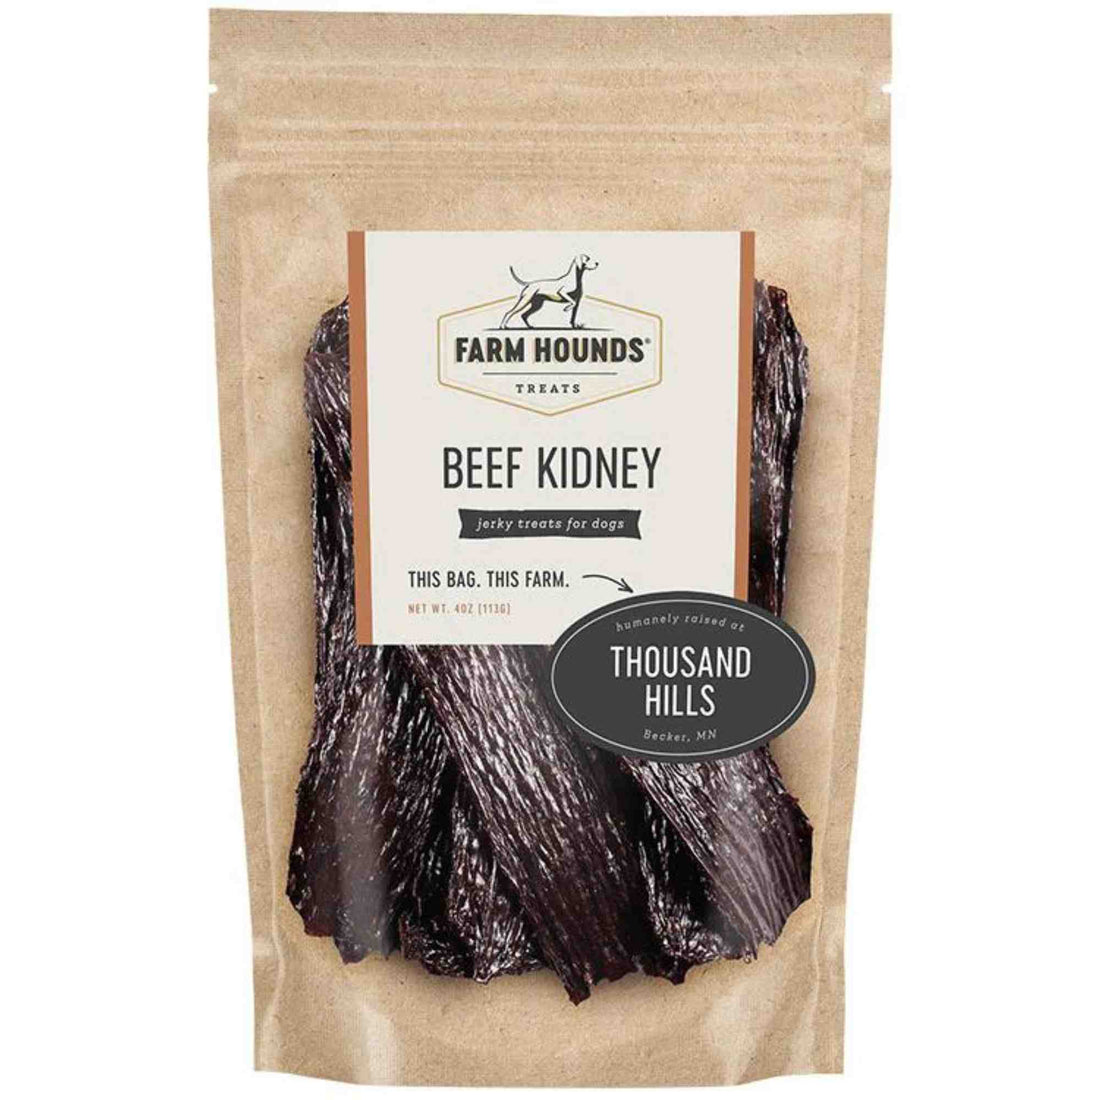 Beef kidney 4oz front Dehydrated Dog treat chew thousand hills Farm Hounds